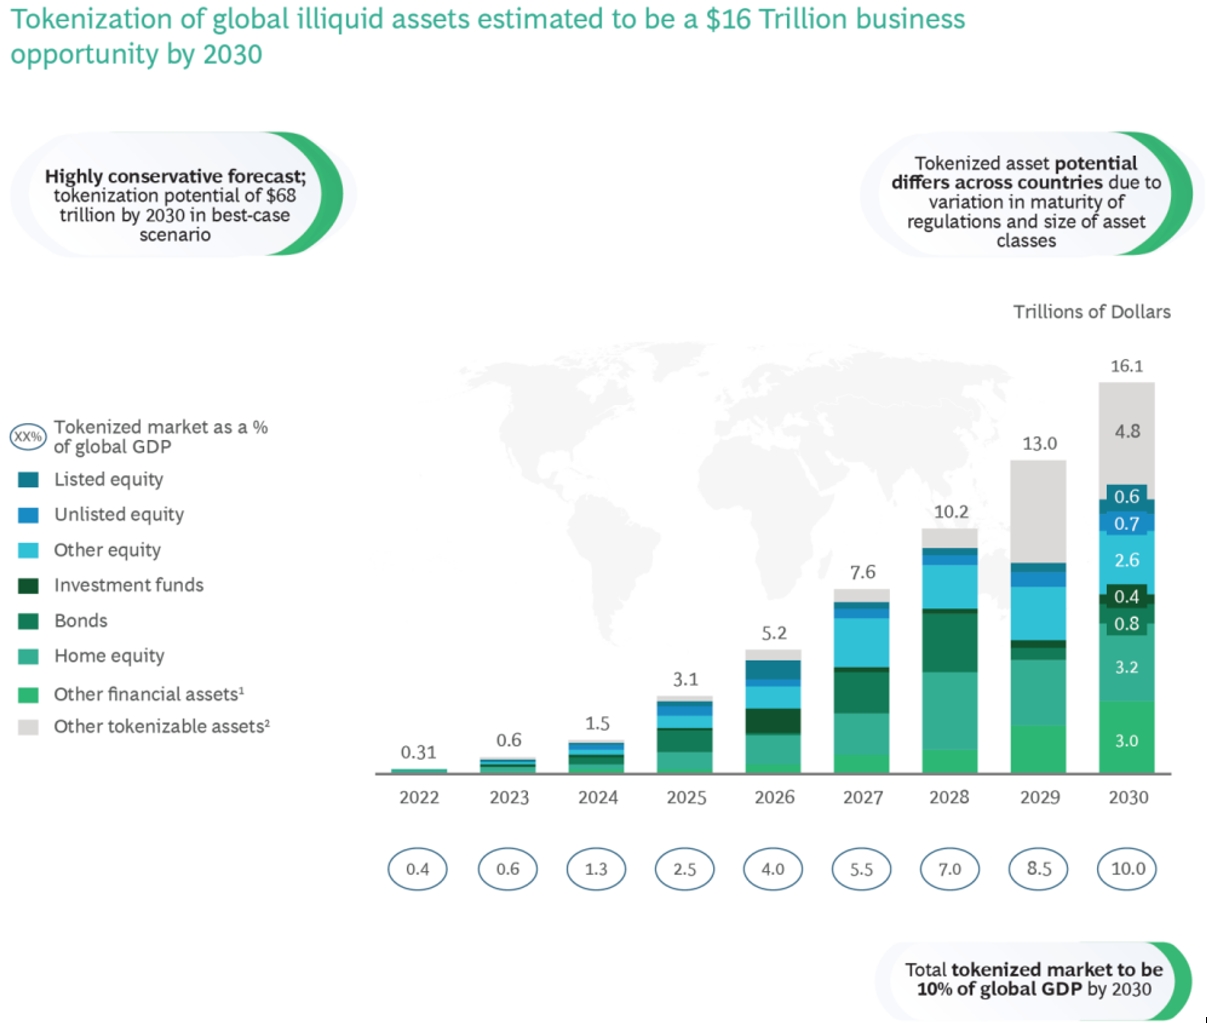 tokenization-of-global-illiquid-assets-estimated-to-be-a-16-trillion-dollar-business-opportunity-by-2023